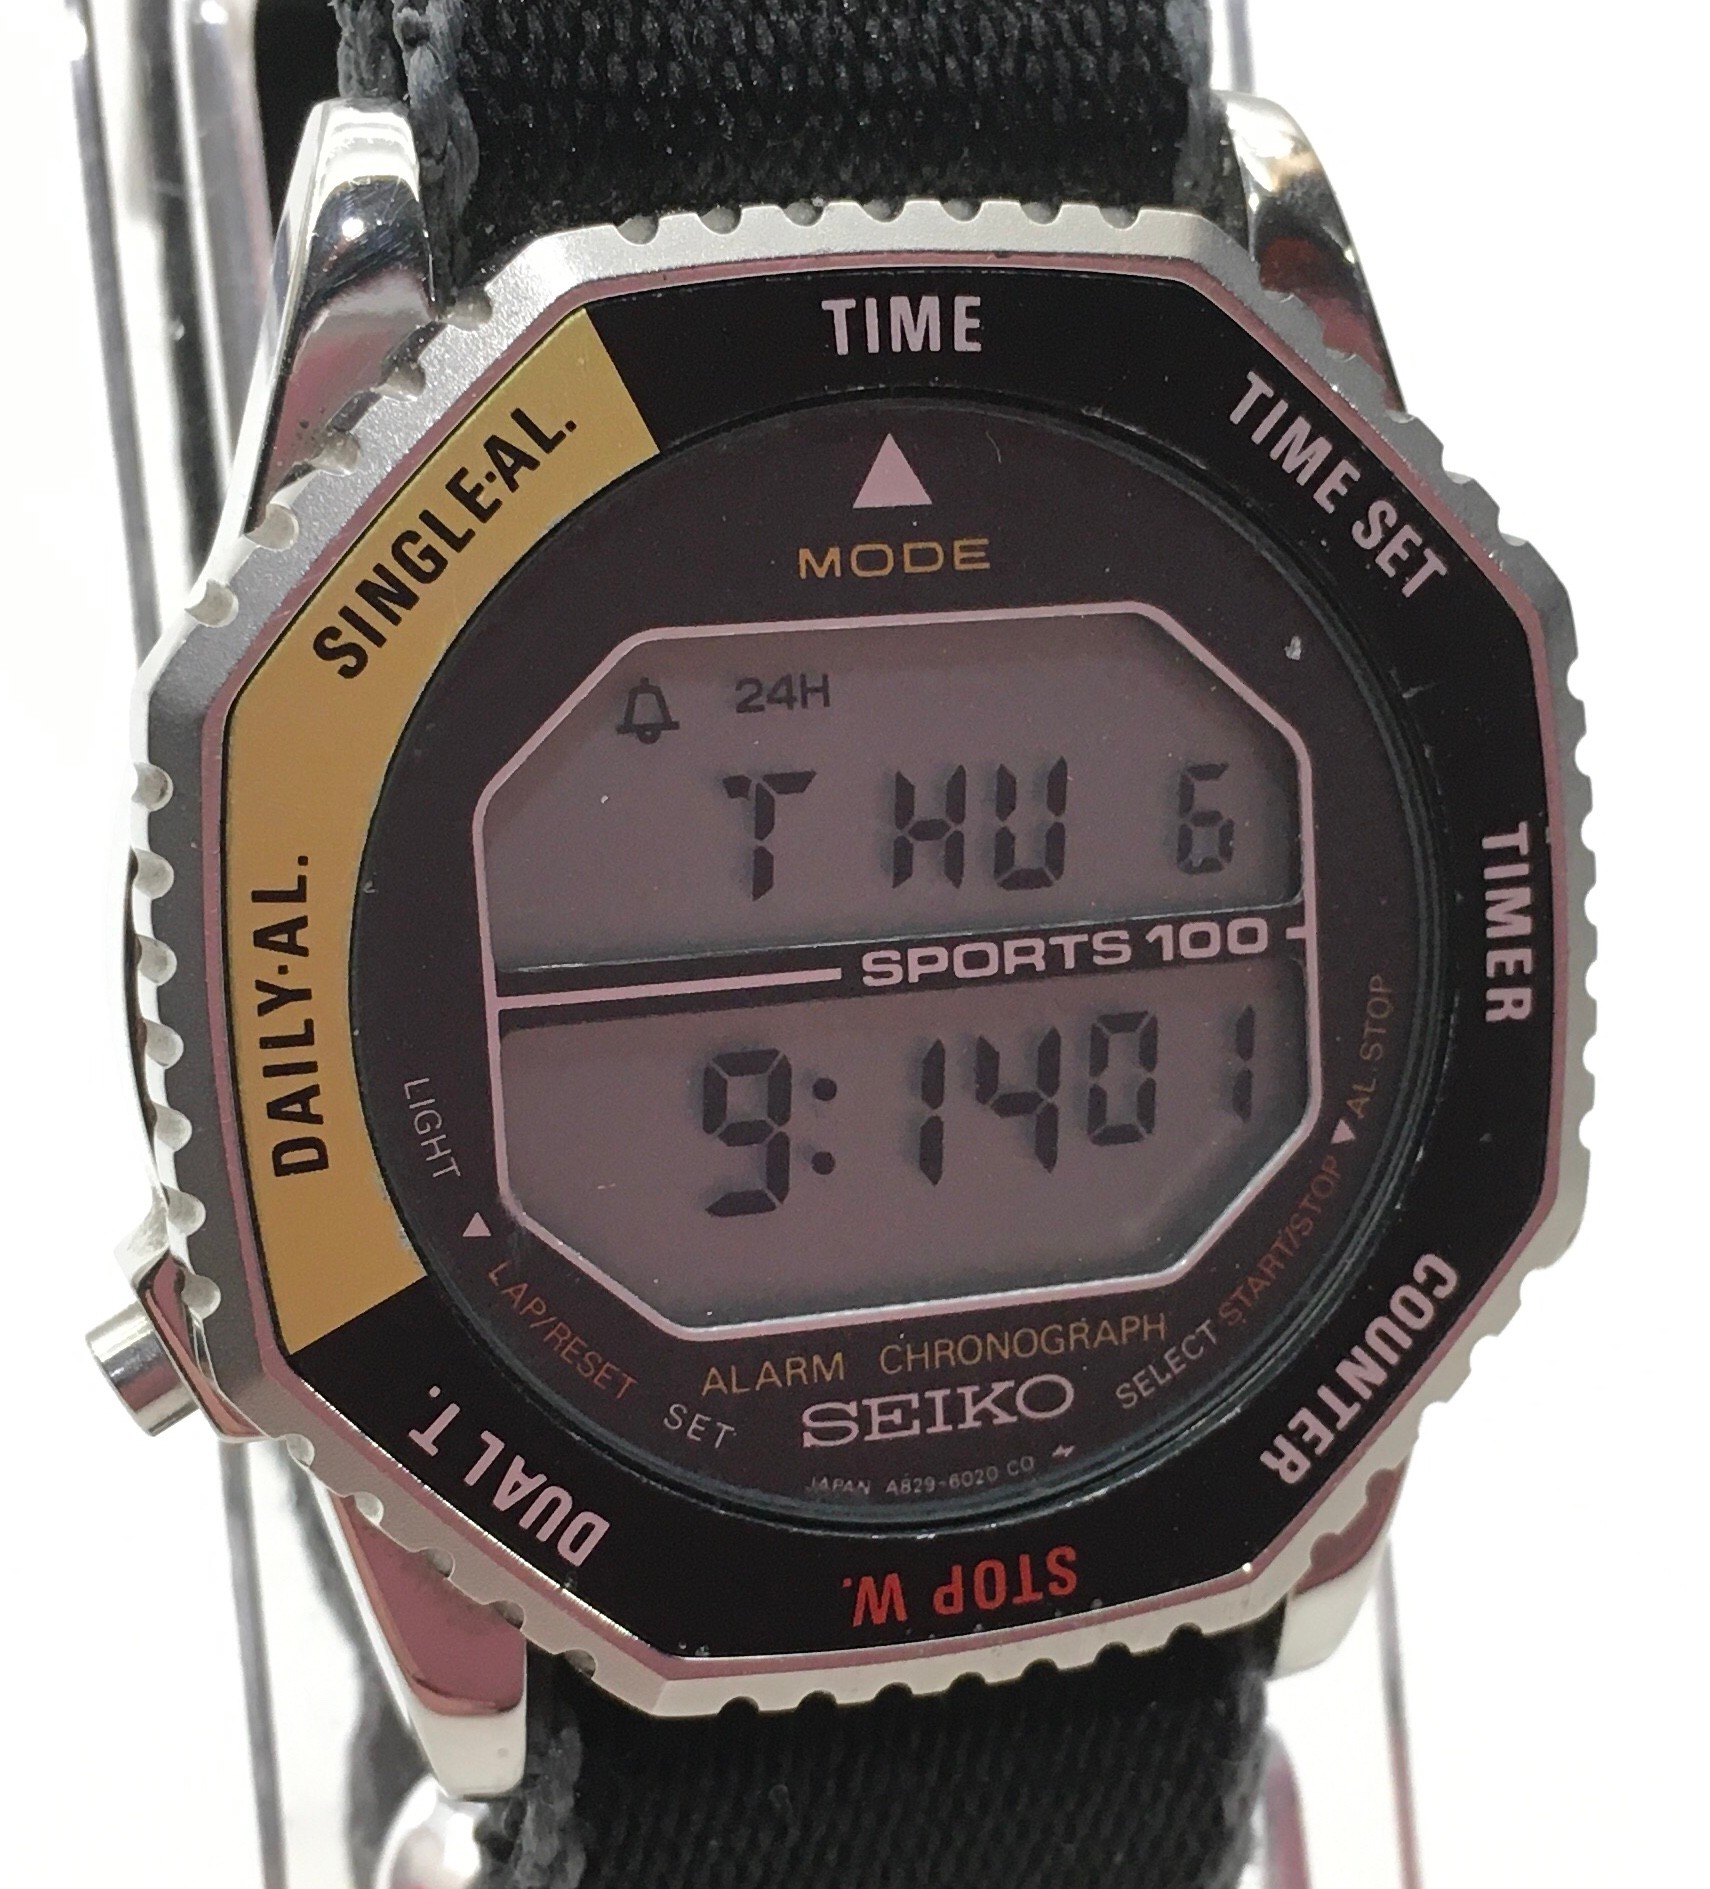 Rare Seiko 'Astronaut' multi function digital watch, model ref A829-6020.  Produced in July 1982 and